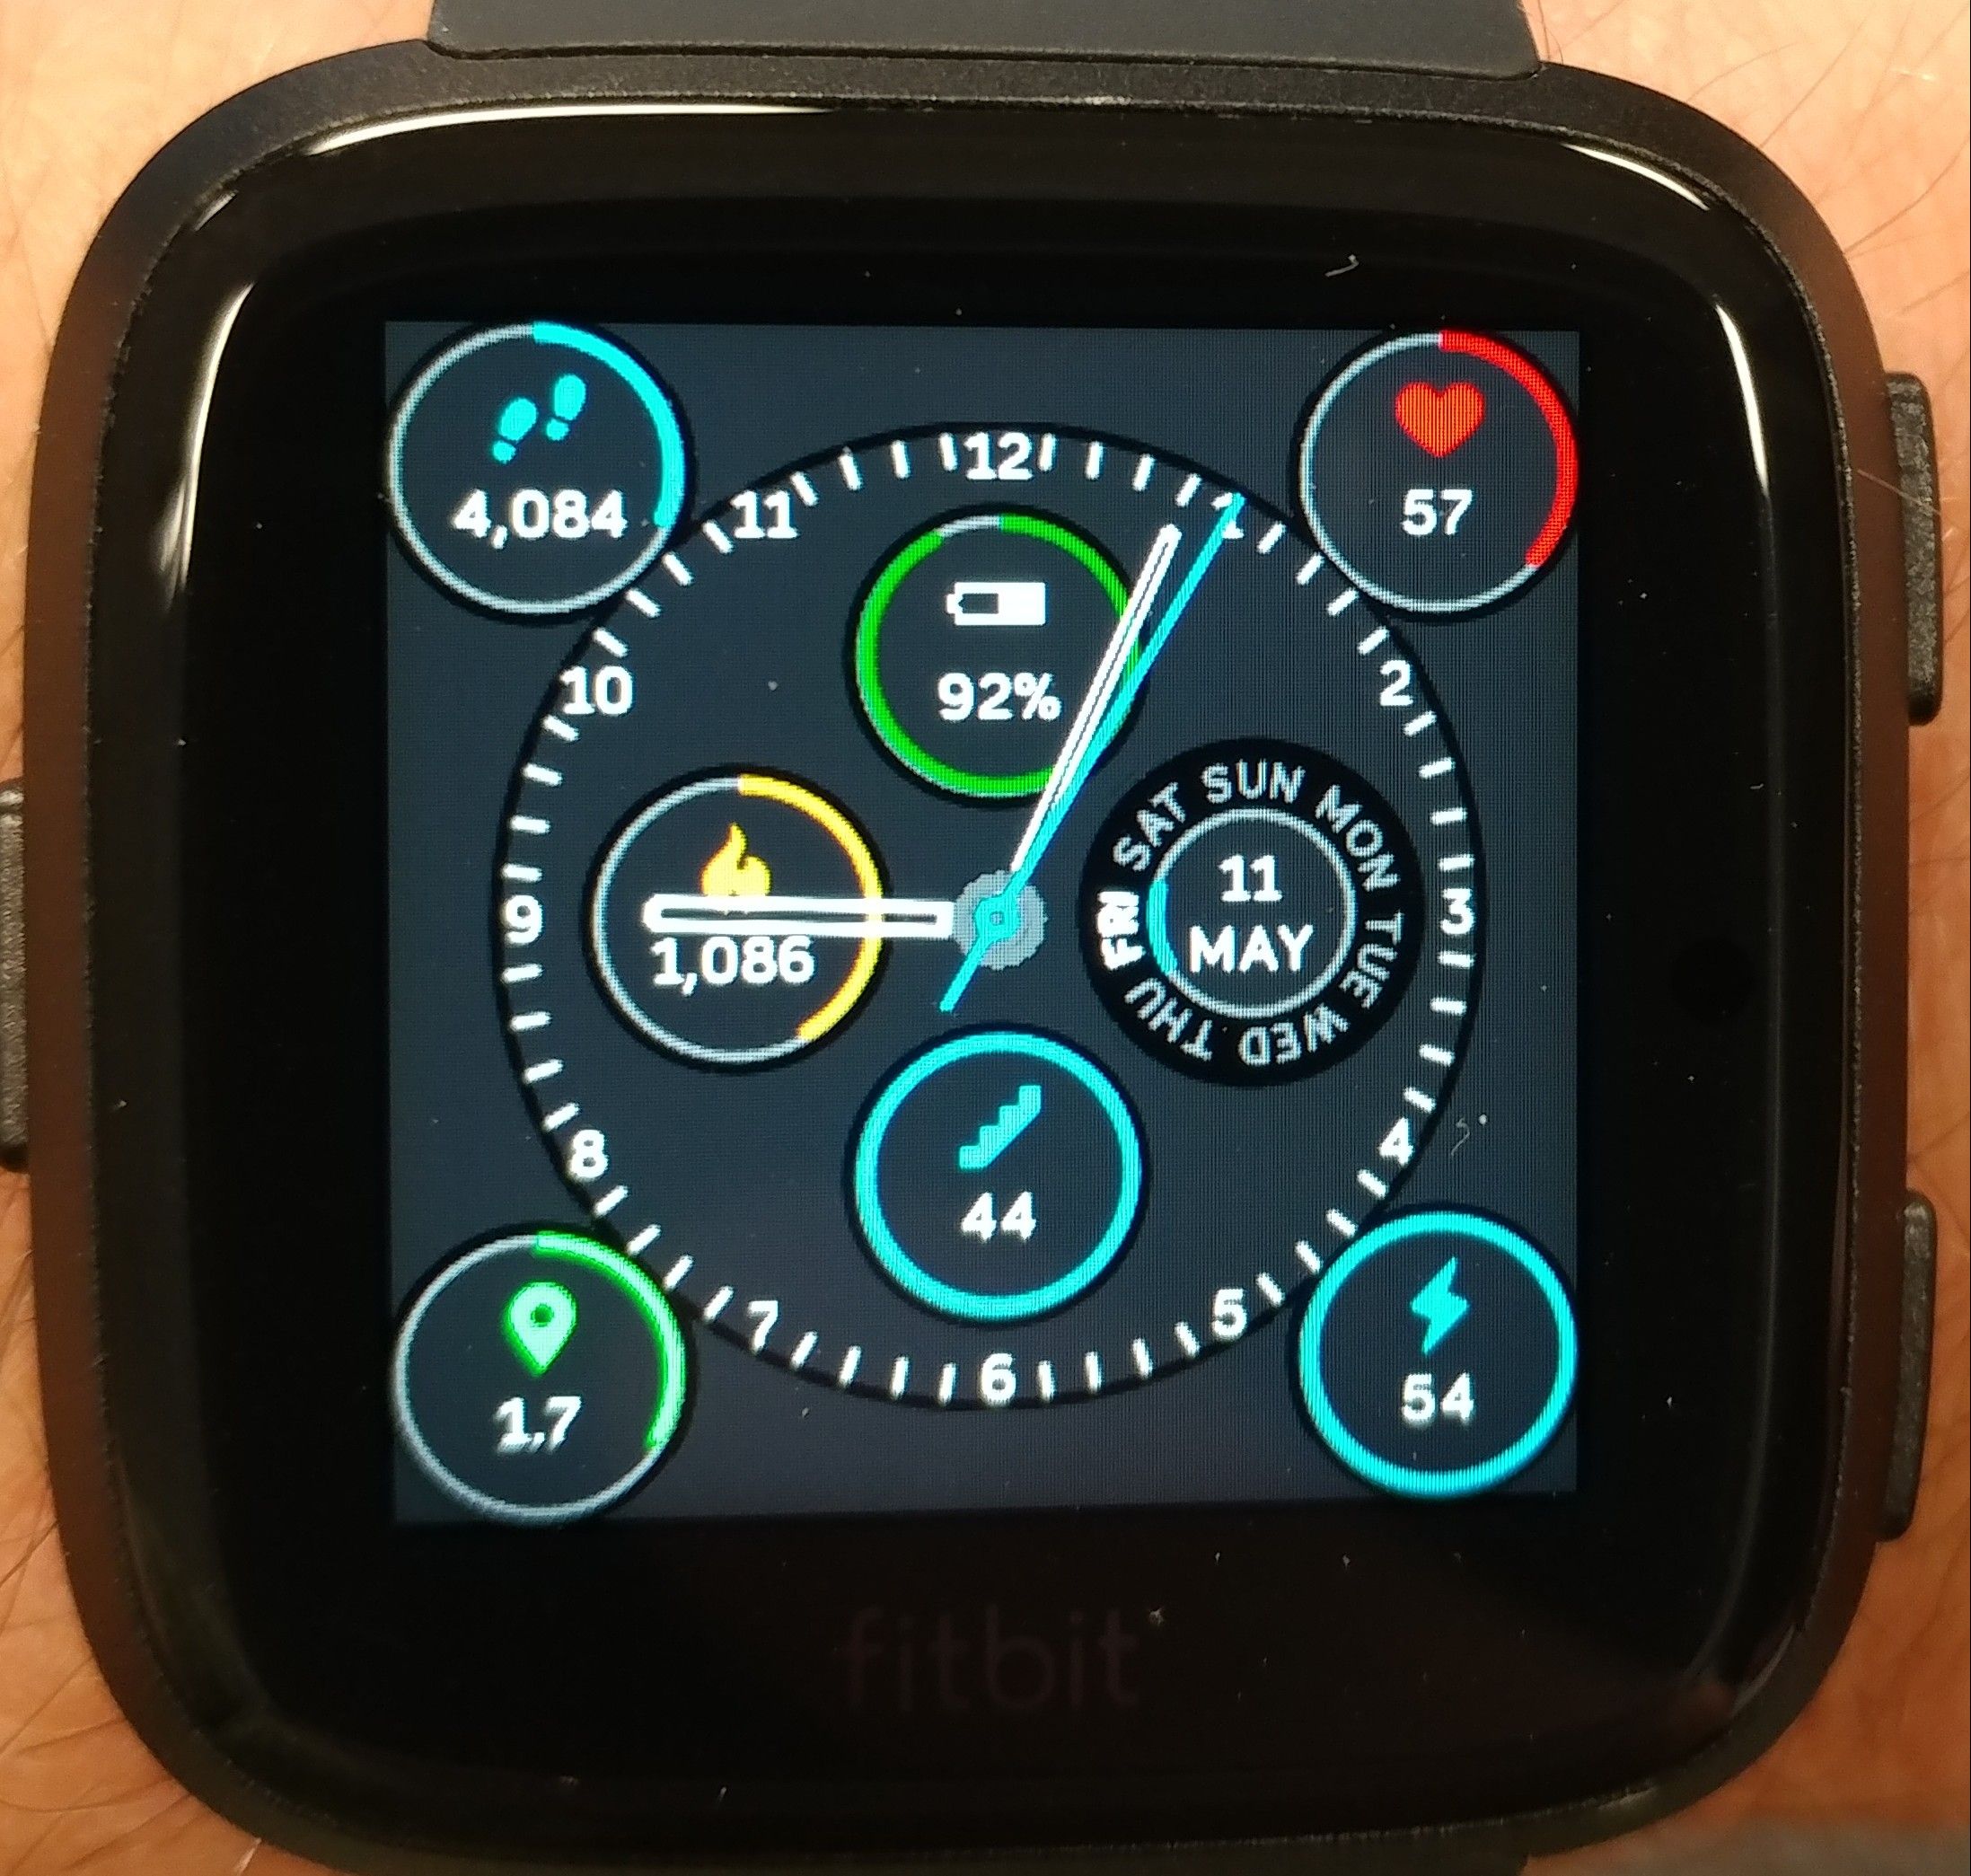 fitbit versa clock faces with seconds